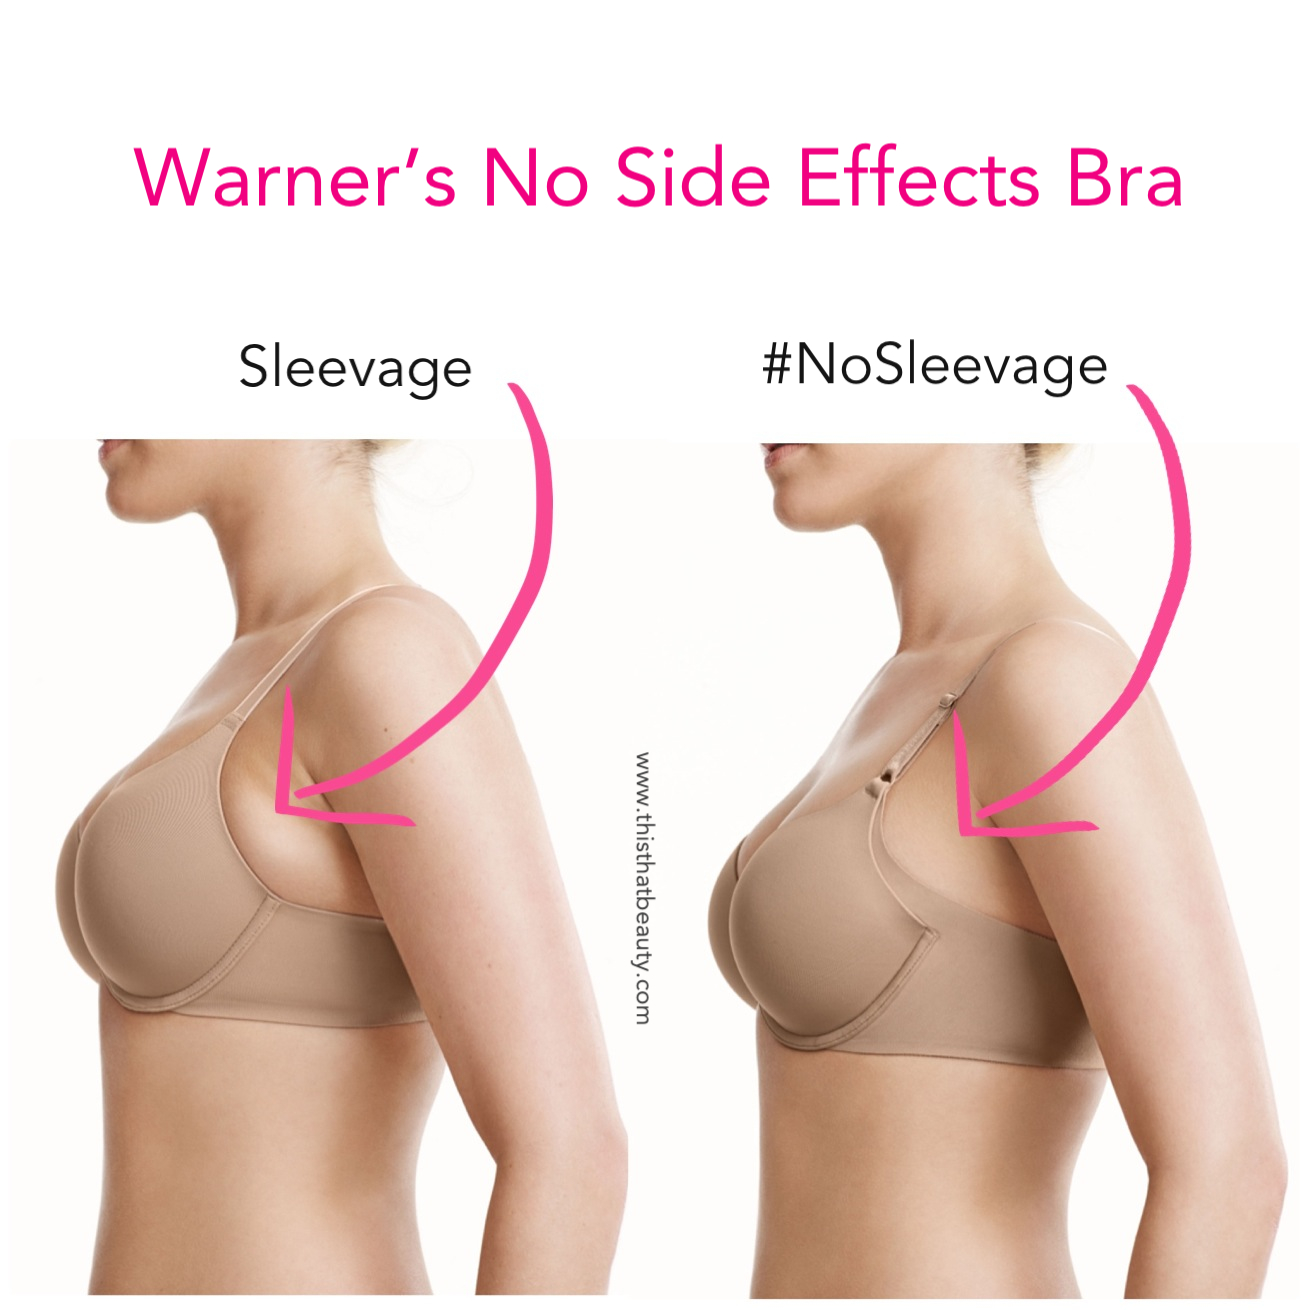 Glamour Editors Reviews of Warner No Side Effect's Bra That Stops Armpit  Fat